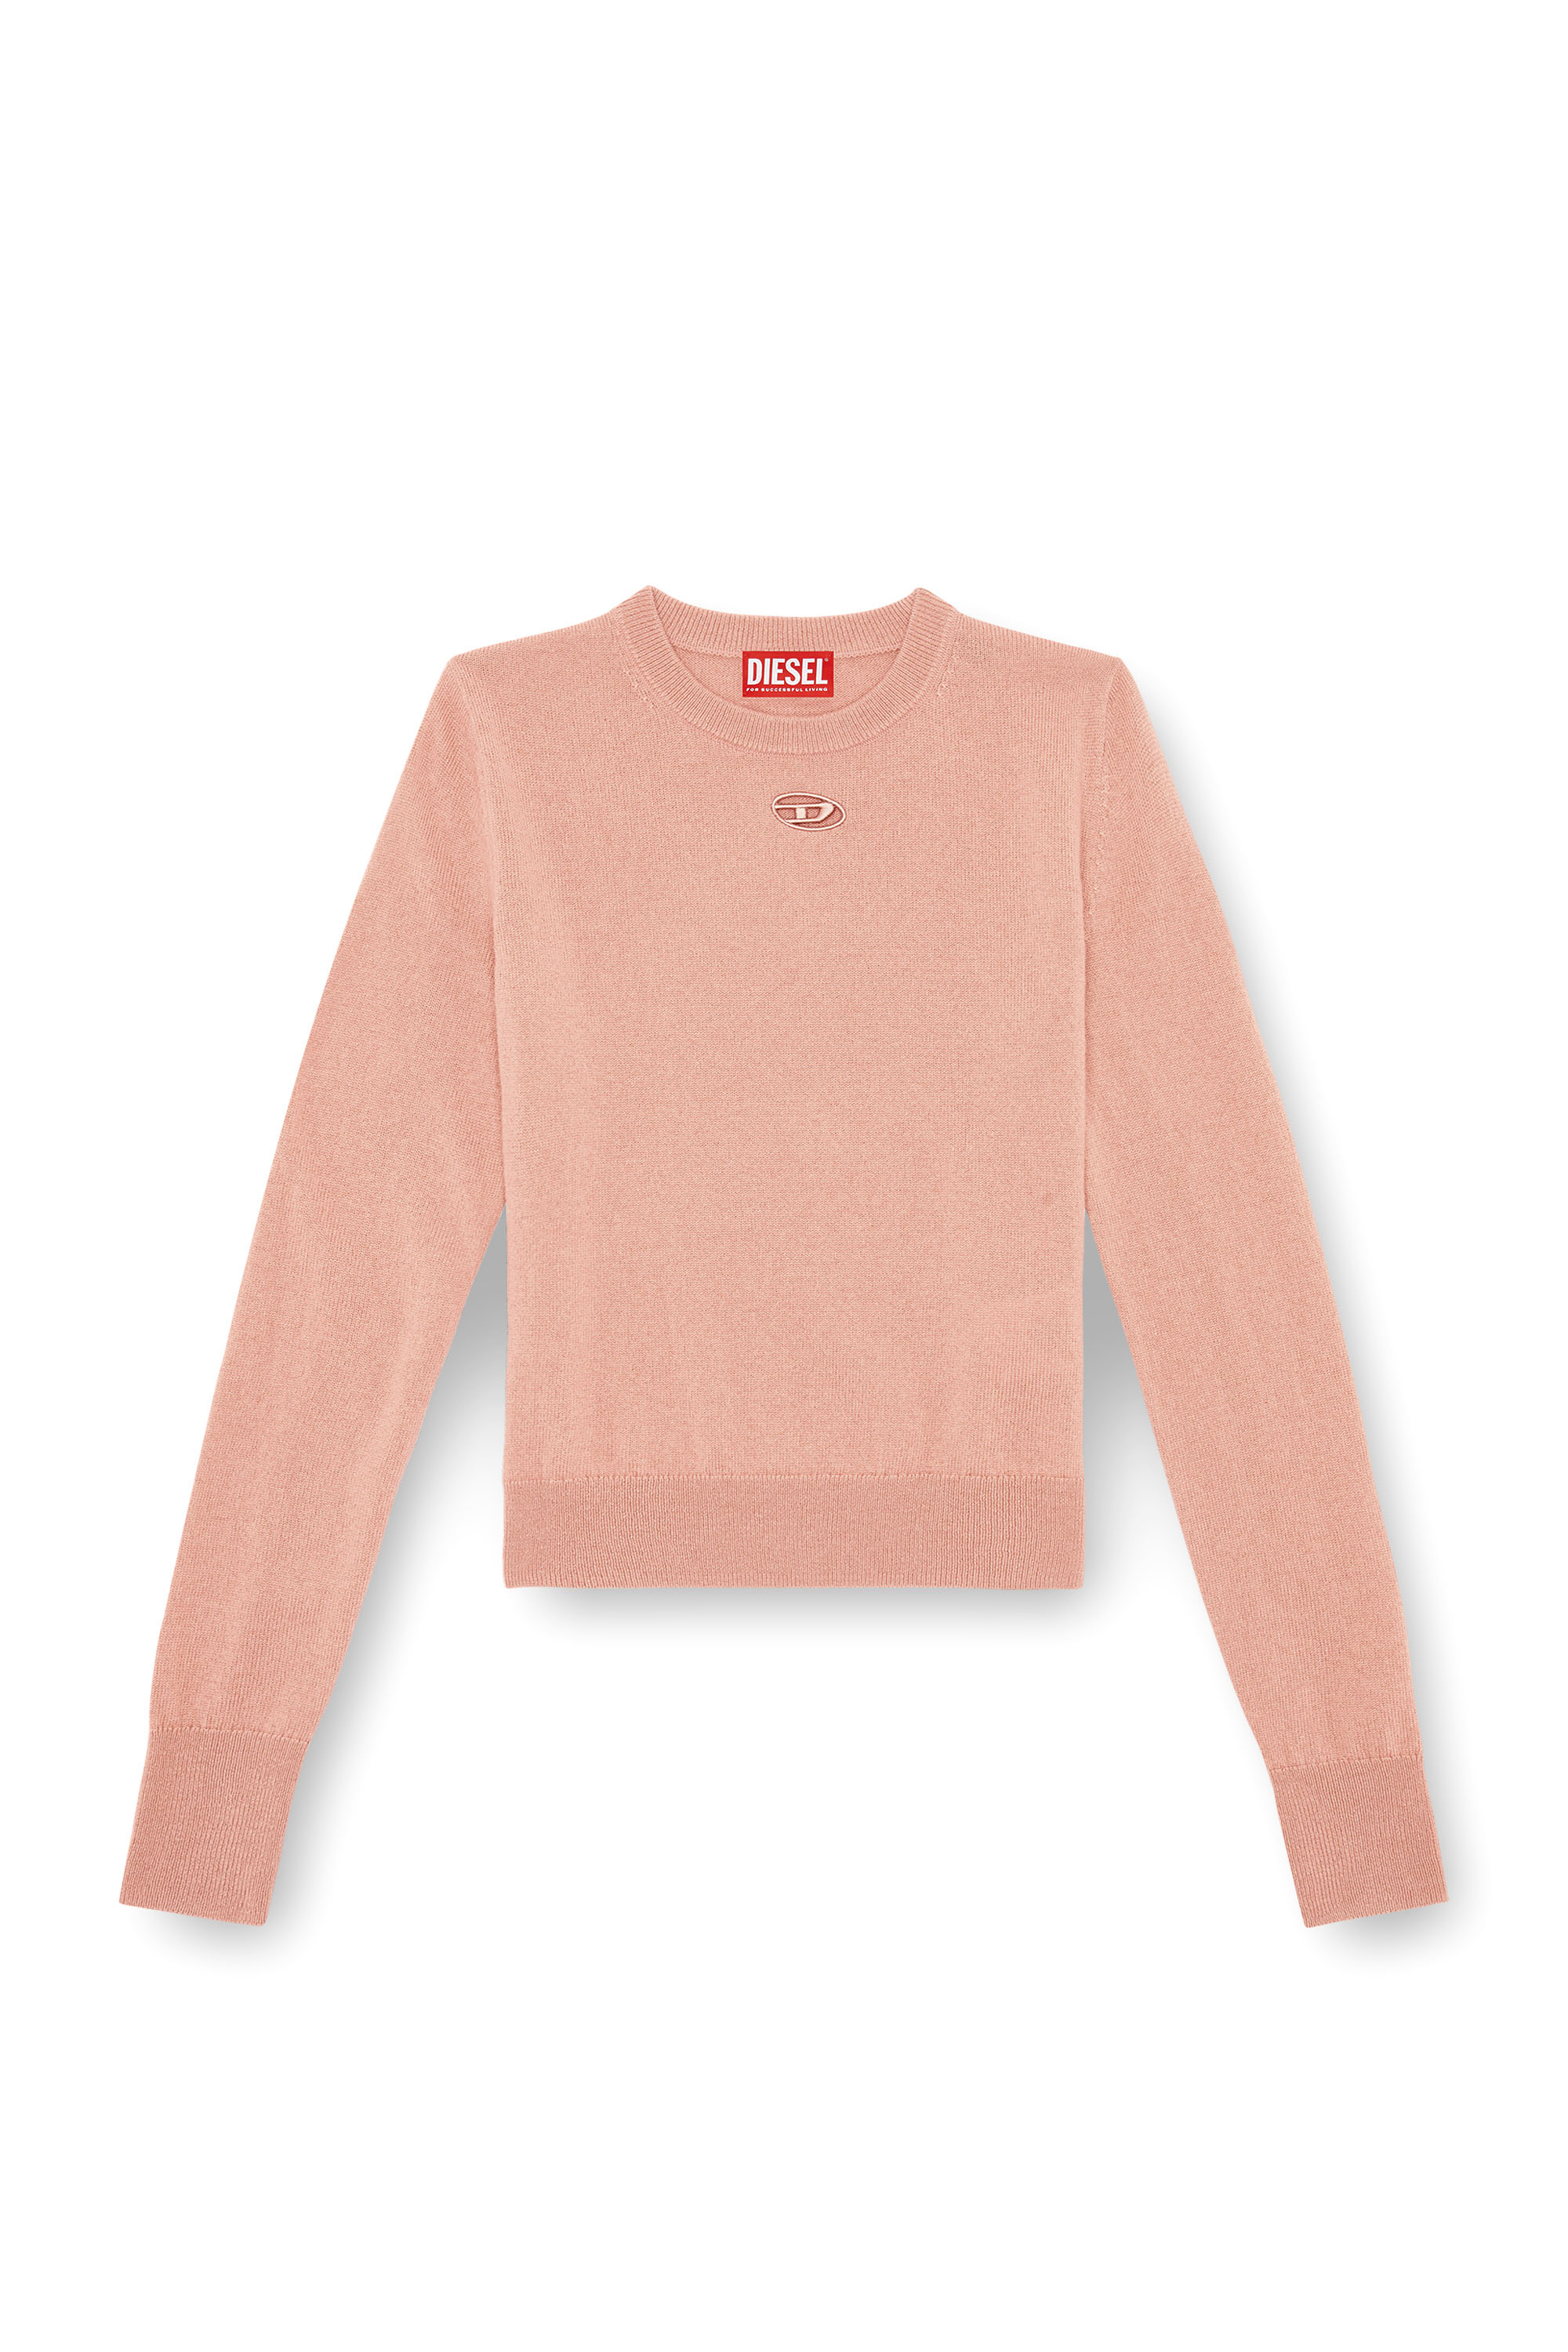 Diesel - M-AREESAX, Woman Wool and cashmere top in Pink - Image 5